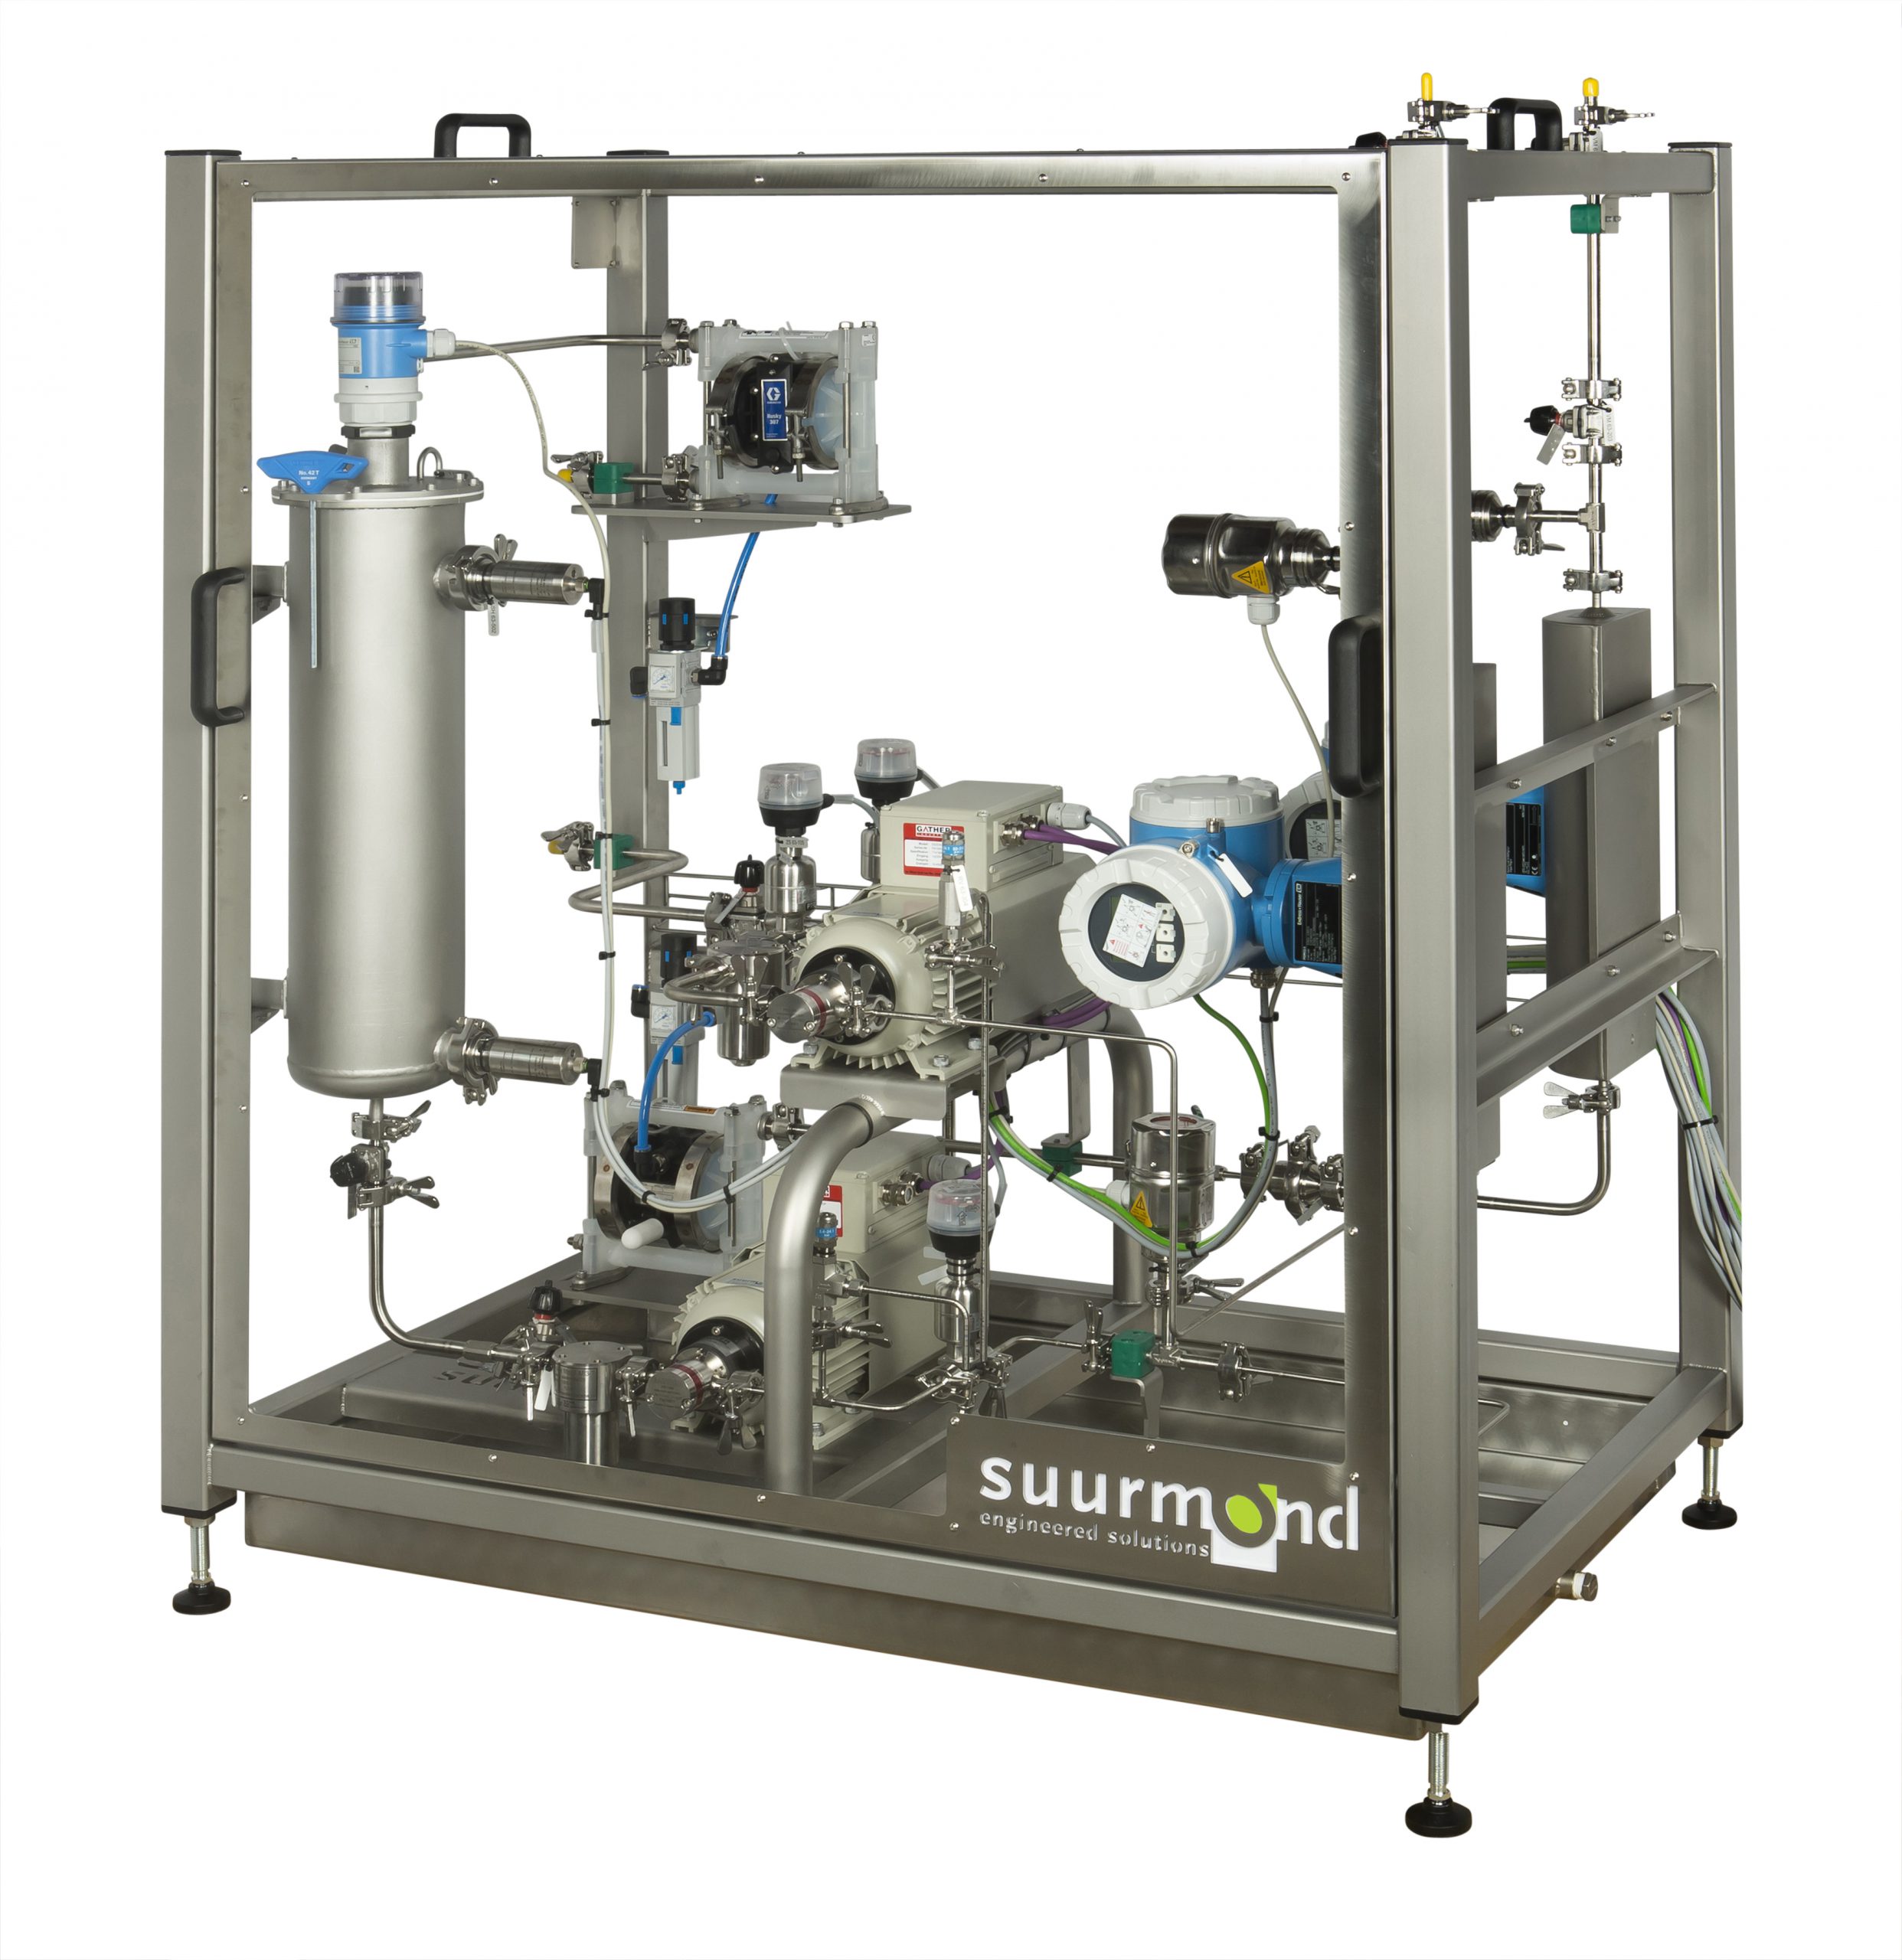 The dosing and mixing module incorporates two dosing pumps and three flow meters.